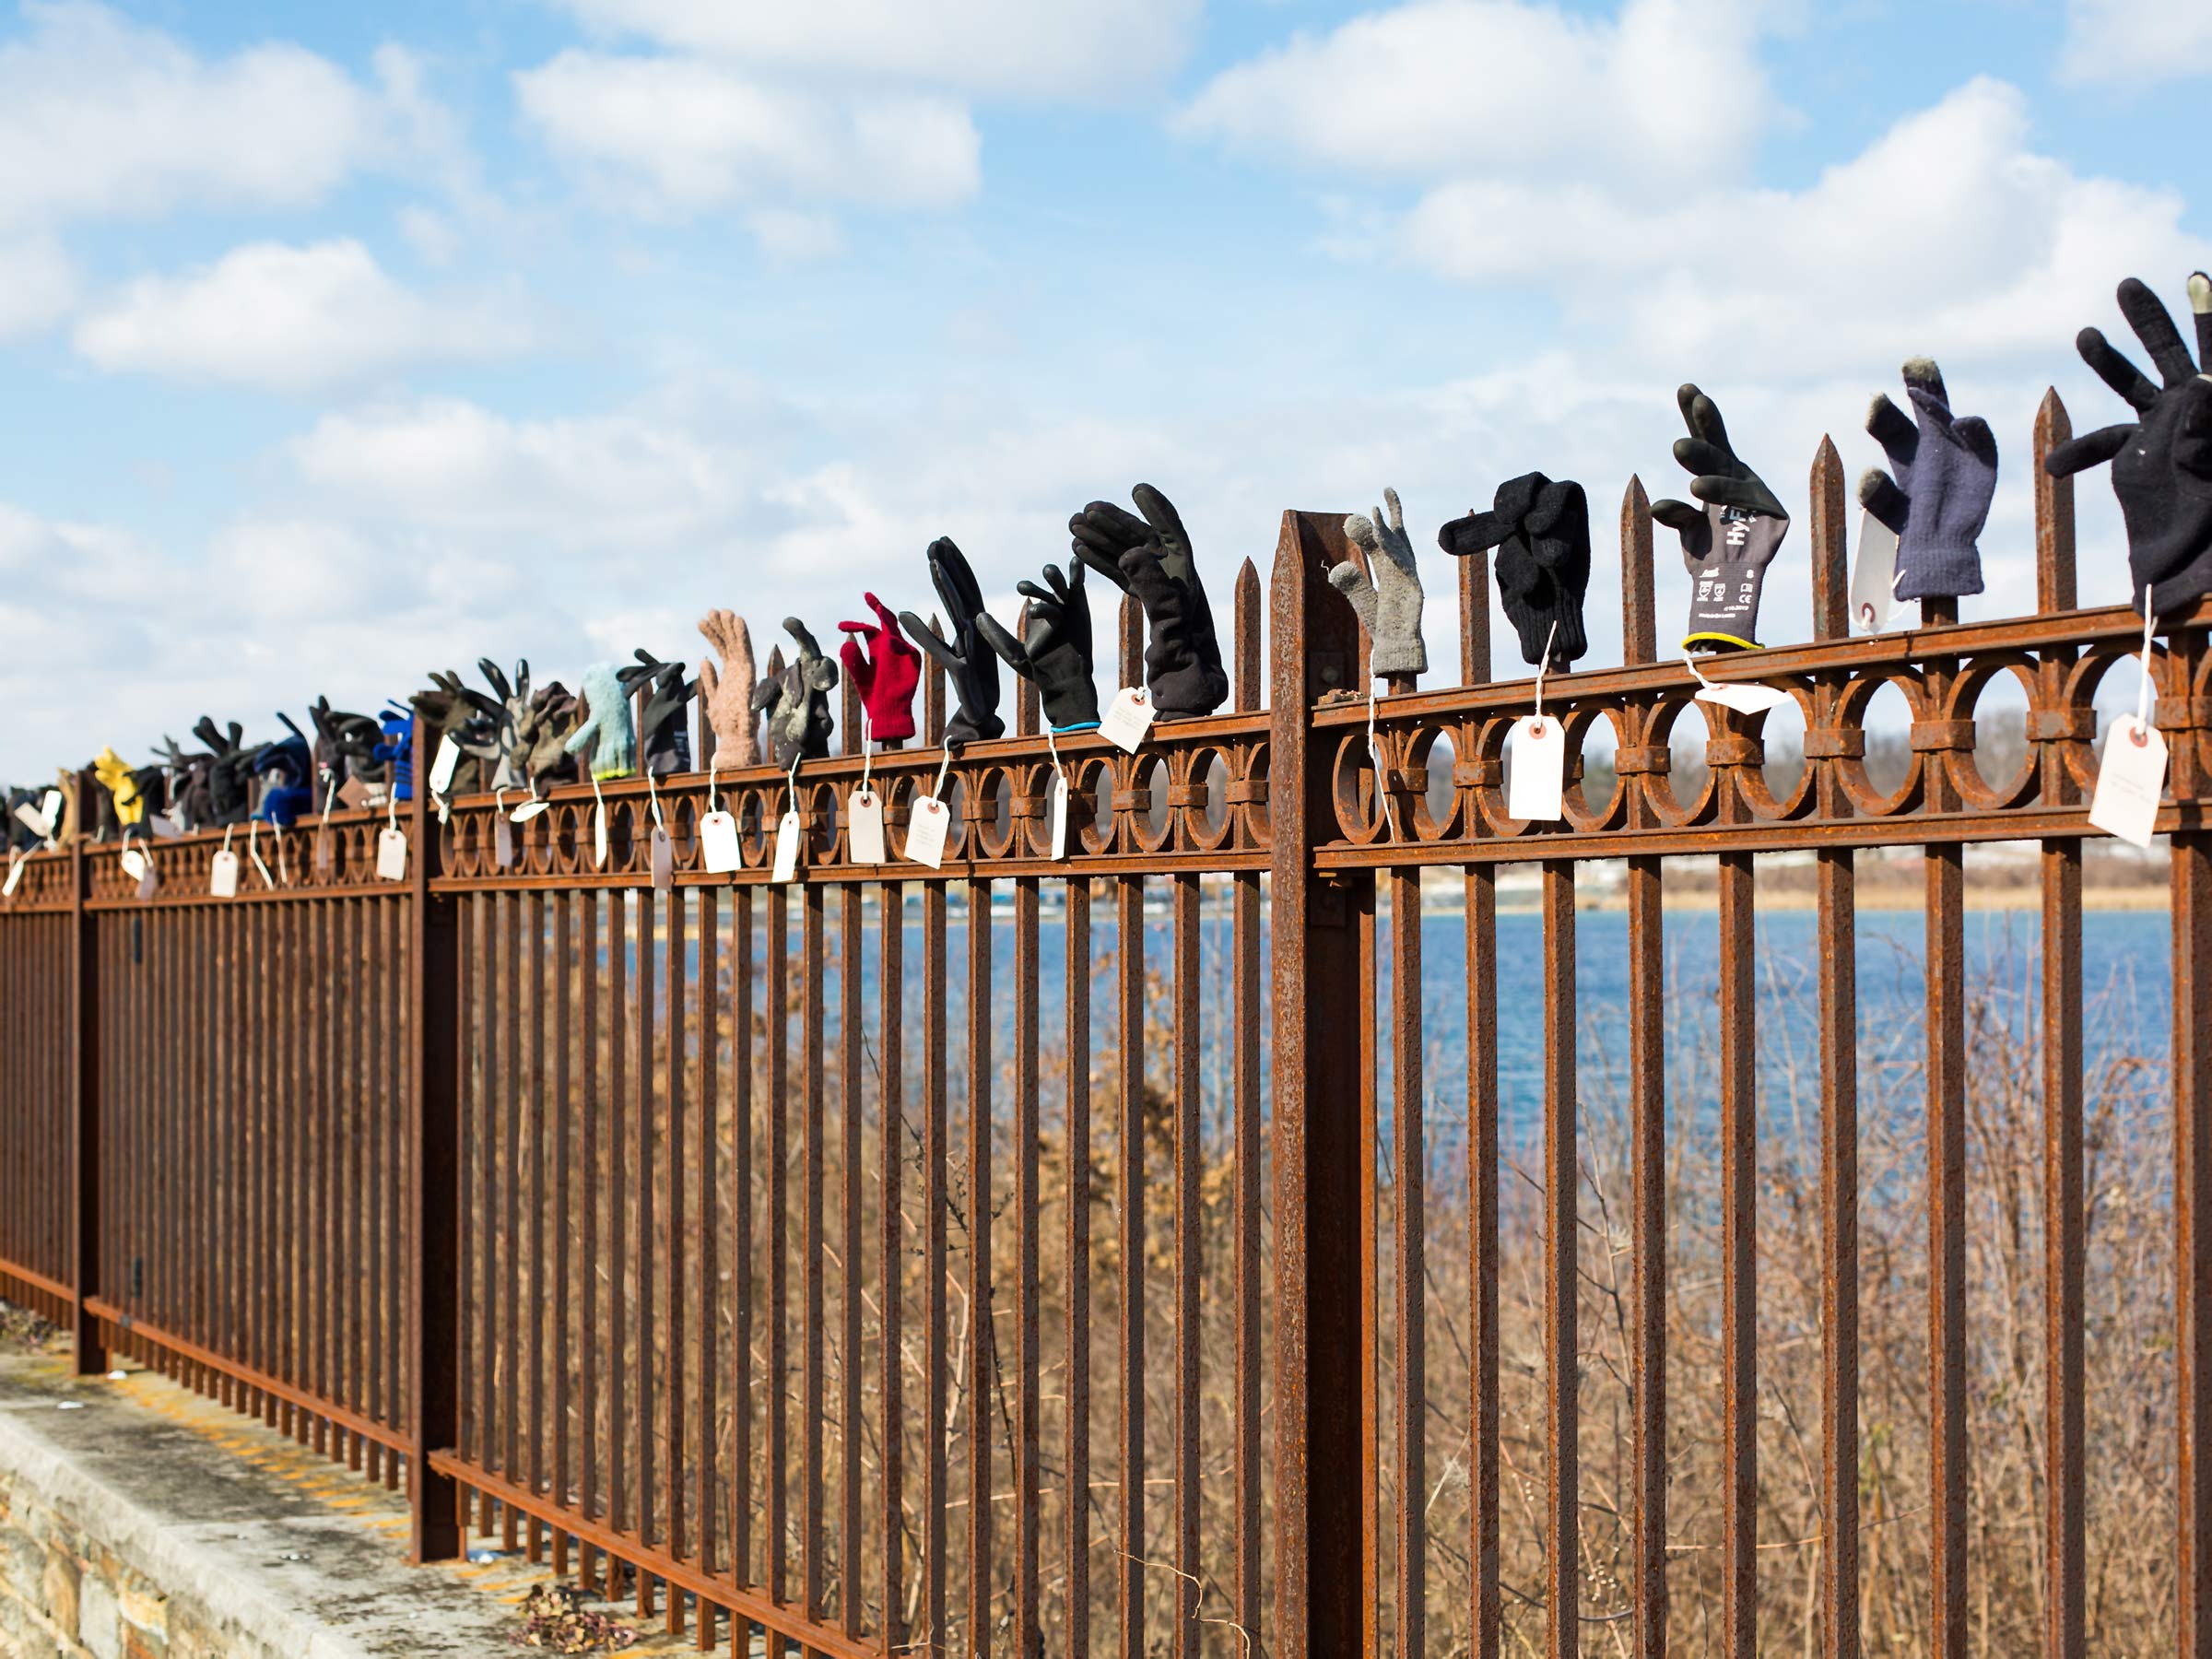 Dozens of lost gloves arranged on a long fence for the public art installation Library of Lost Gloves and Lost Loves by Bruce Willen